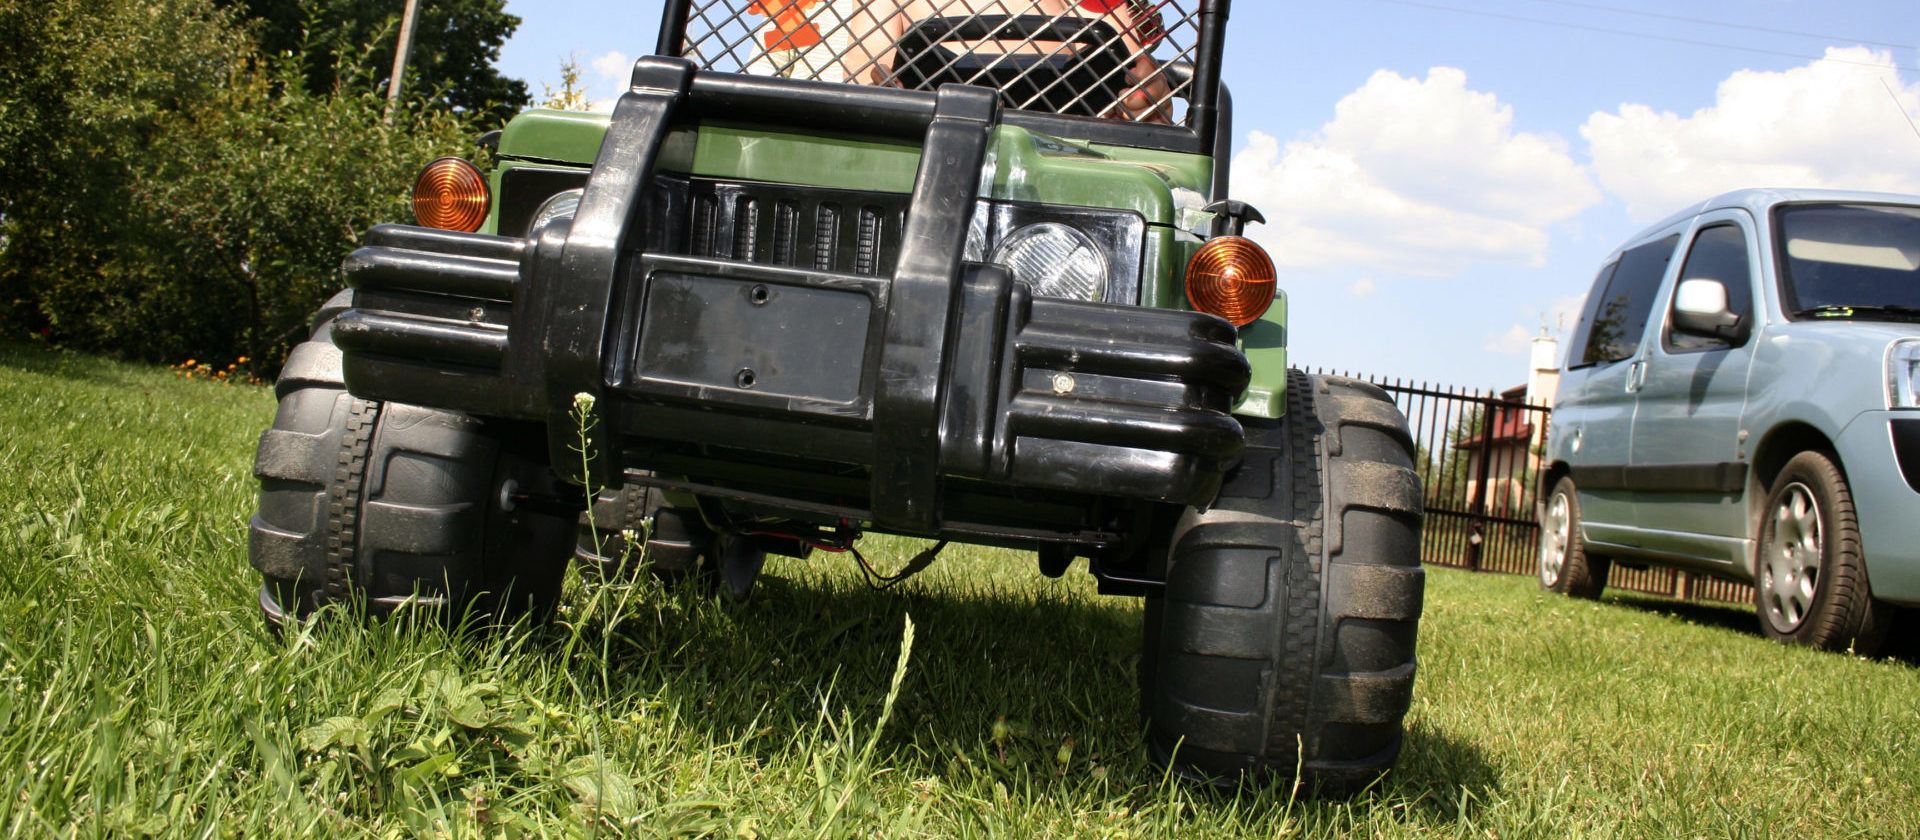 Power Wheels with Rubber Tires